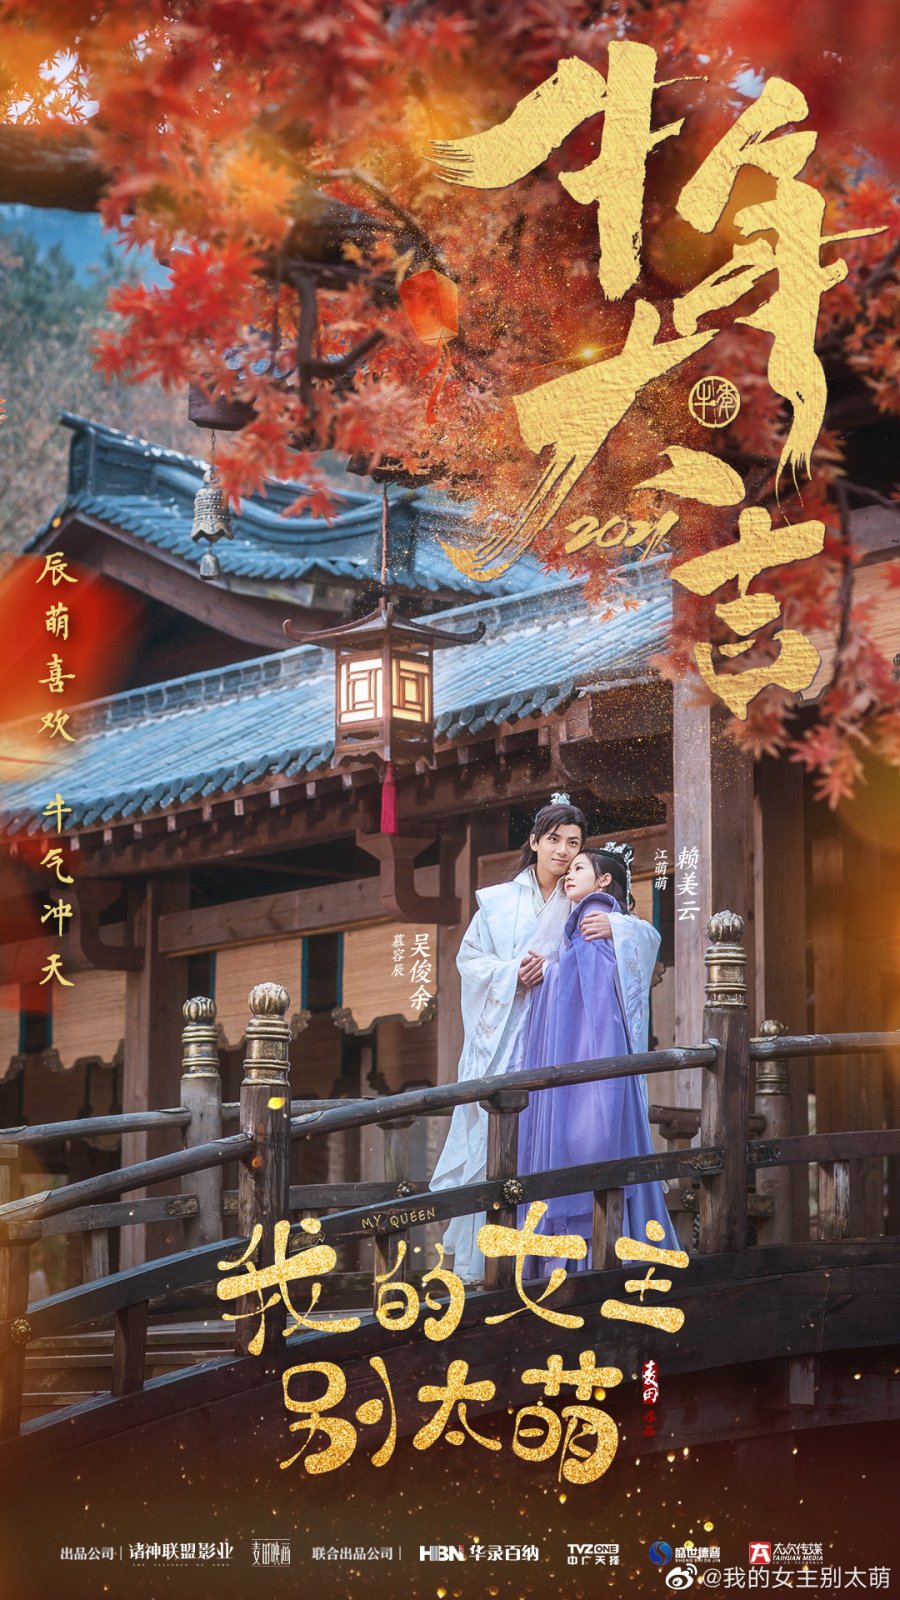 Dramapotatoe - c-drama news and more - Historical romcom webdrama My Queen,  starring Lai Meiyun and Wu Junyu, releases new poster as drama wraps its  run tonight for VIPs #我的女主别太萌